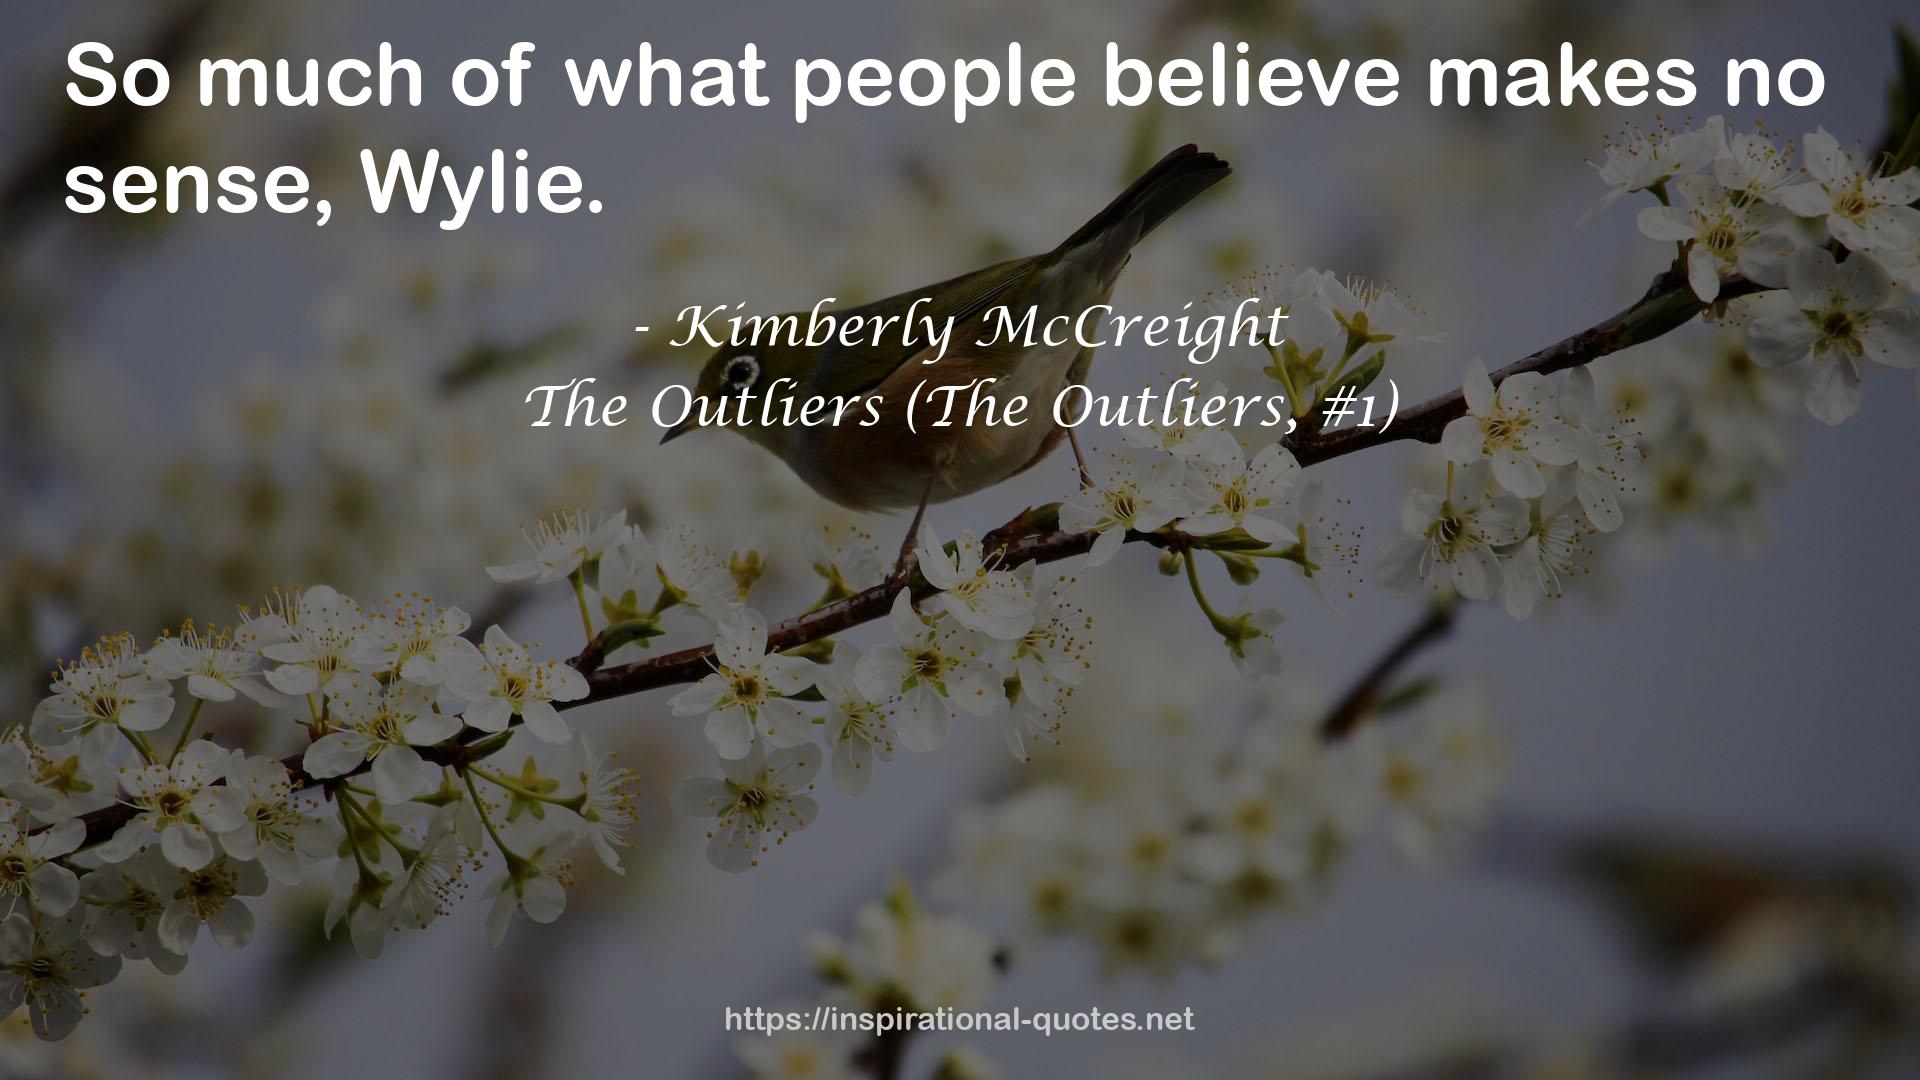 The Outliers (The Outliers, #1) QUOTES